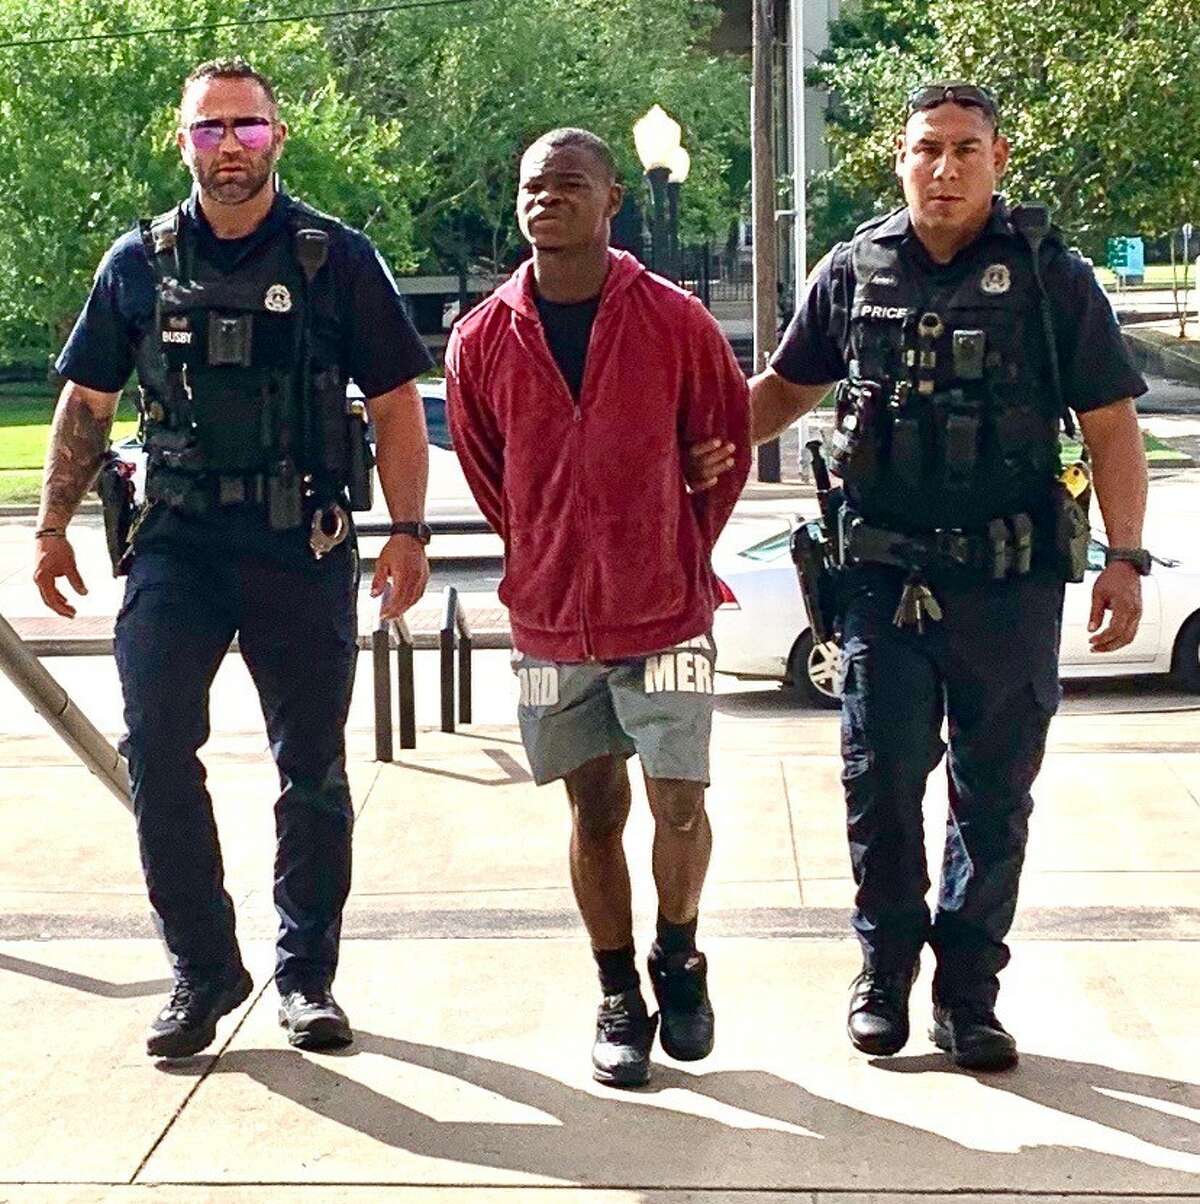 A second teenager wanted in connection with the alleged attempted capital murder of two Beaumont police officers on Sunday has turned himself into authorities. The Beaumont Police Department reported Reginald Guillory, 17, was placed in custody on Tuesday afternoon. 